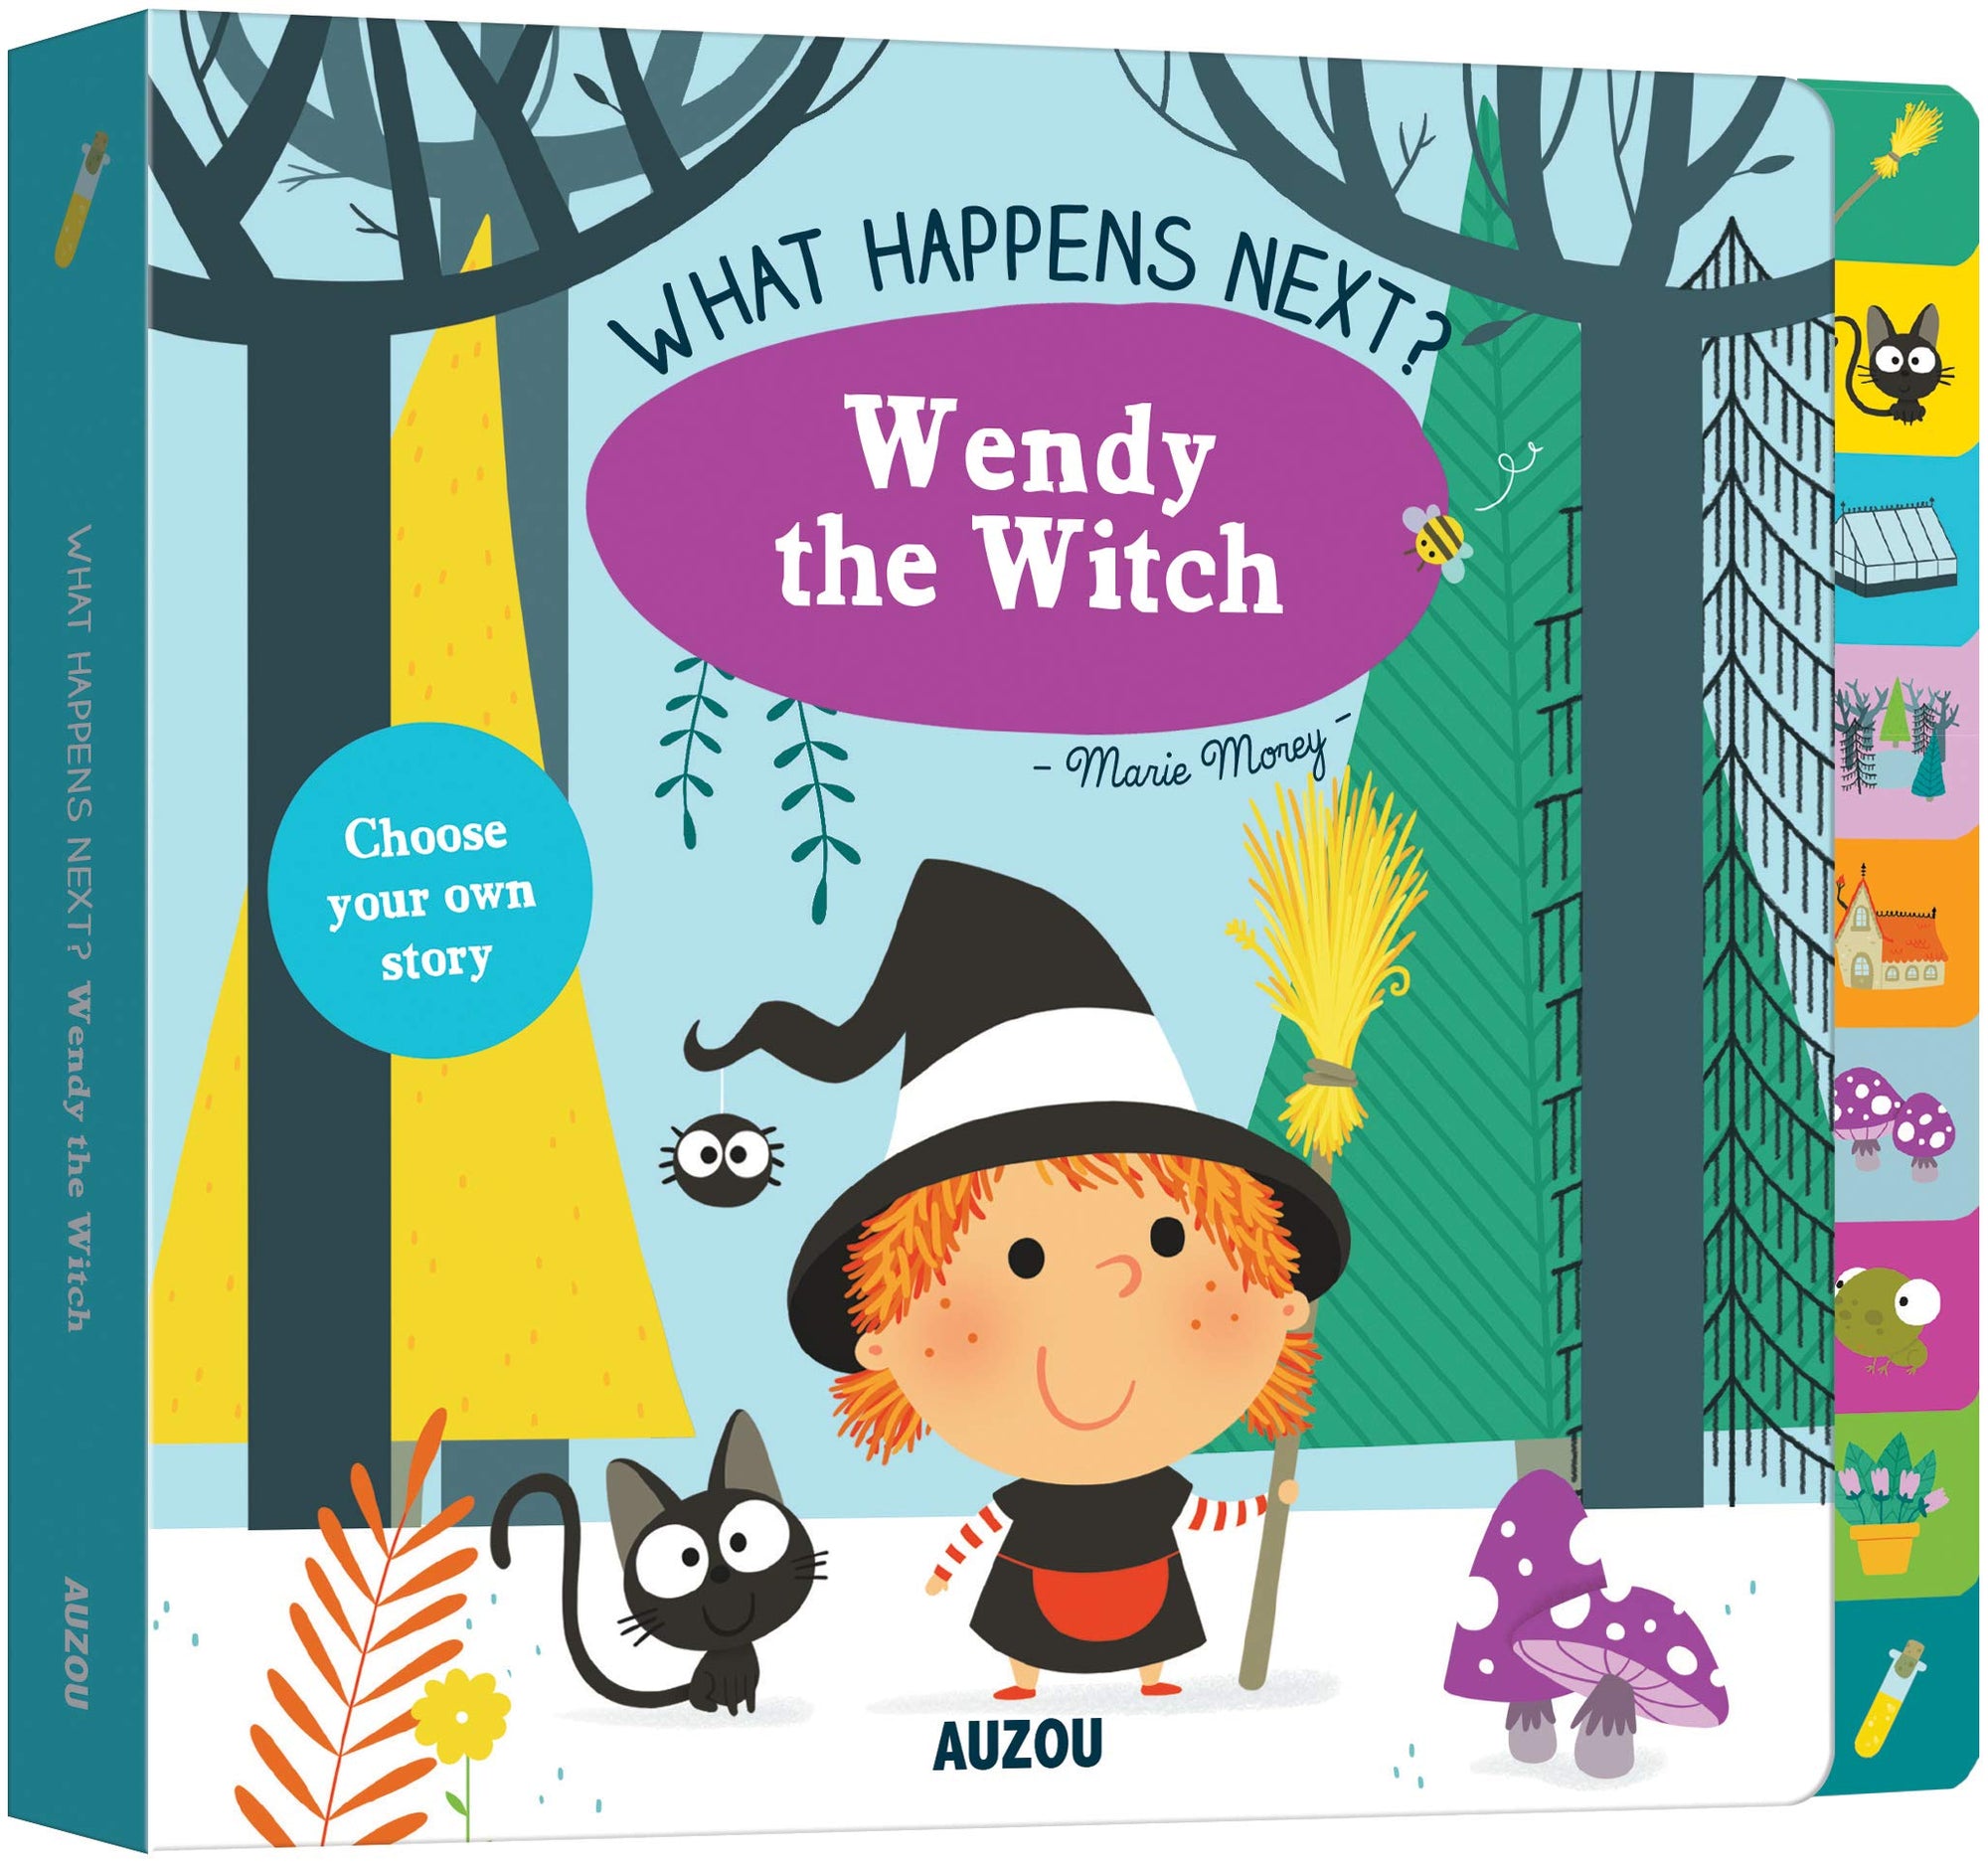 What Happens Next?: Wendy the Witch